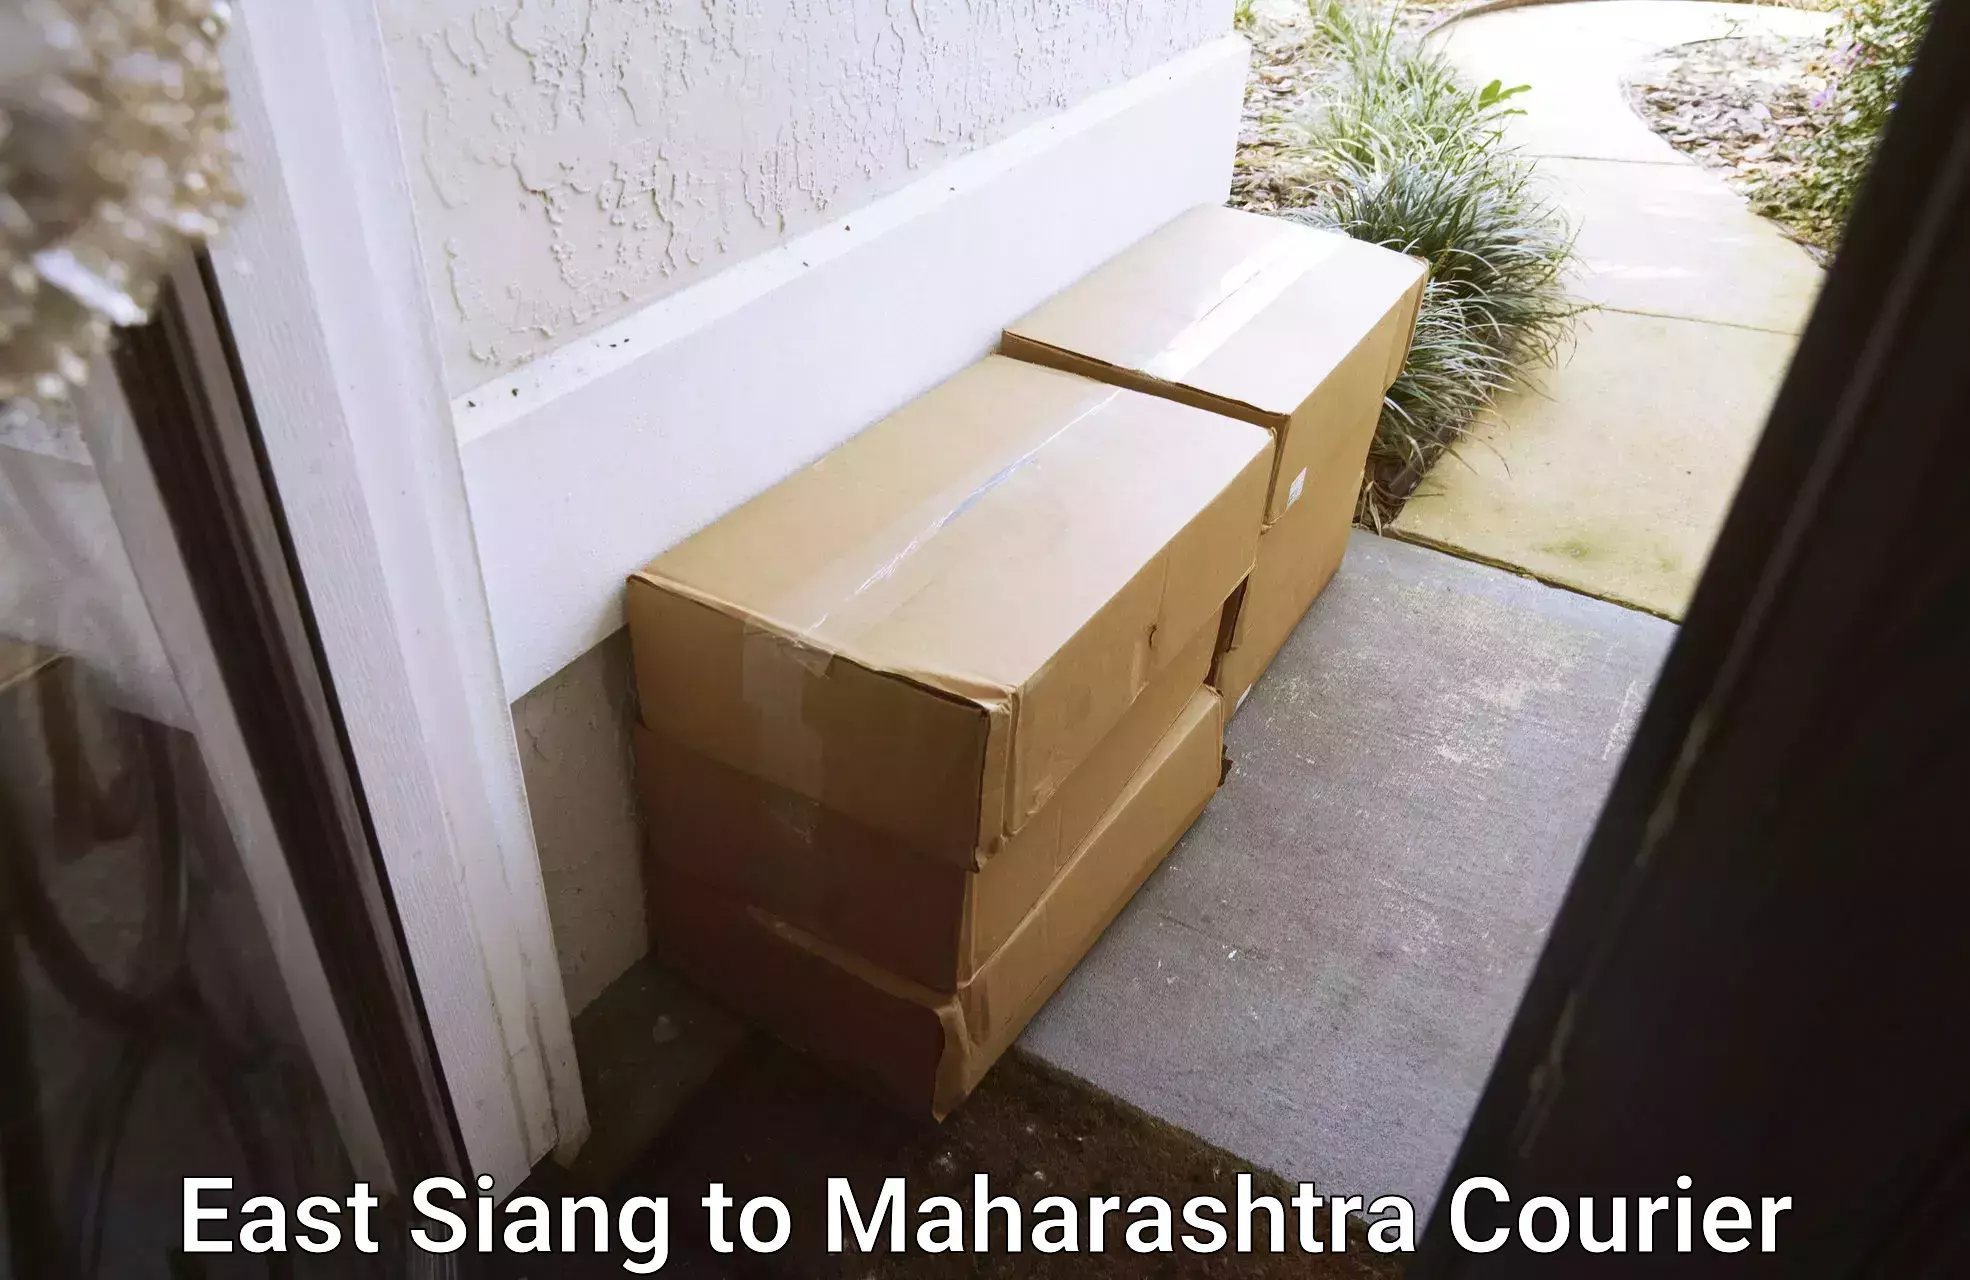 Overnight delivery services in East Siang to Maharashtra